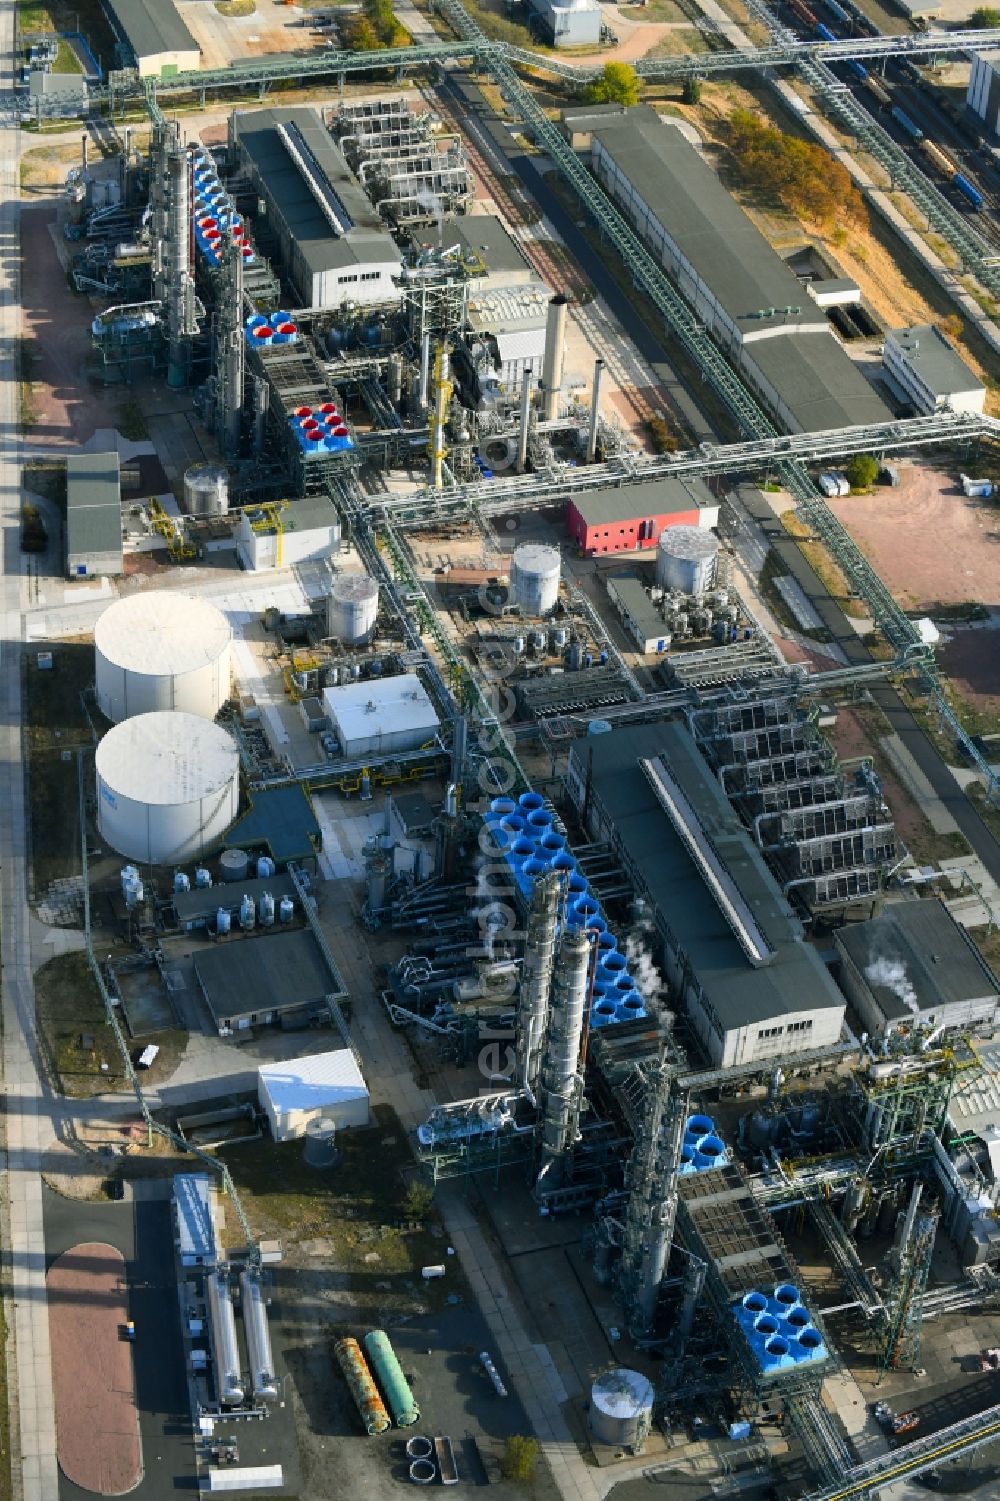 Piesteritz from the bird's eye view: Refinery equipment and management systems on the factory premises of the chemical manufacturers SKW Stickstoffwerke Piesteritz GmbH on Moellensdorfer Strasse in Piesteritz in the state Saxony-Anhalt, Germany